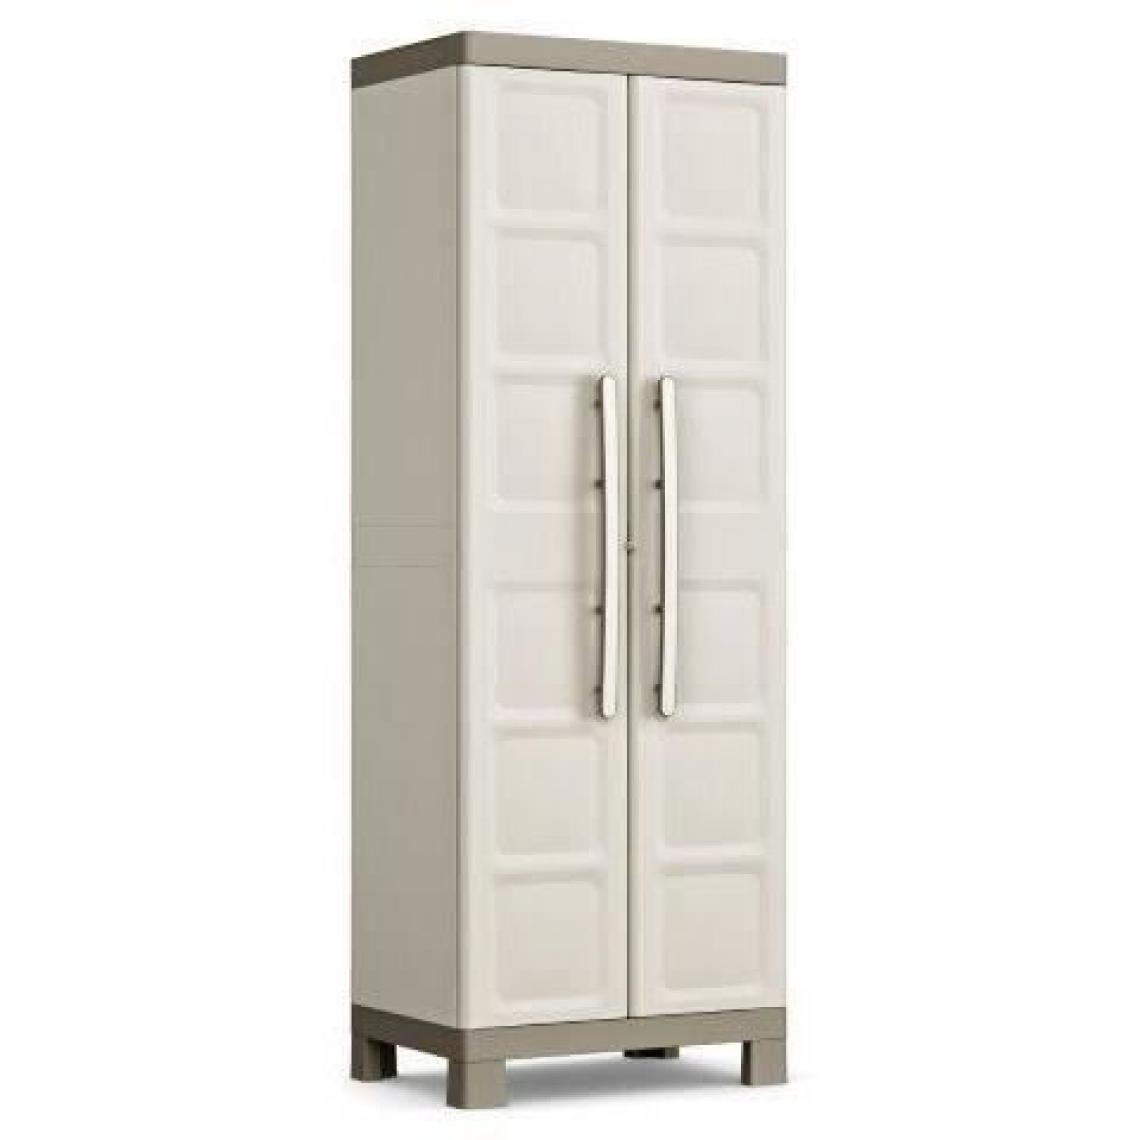 Keter - KETER Armoire haute XL EXCELLENCE - Beige et Taupe - 89 x 54 x 182 cm - Armoires